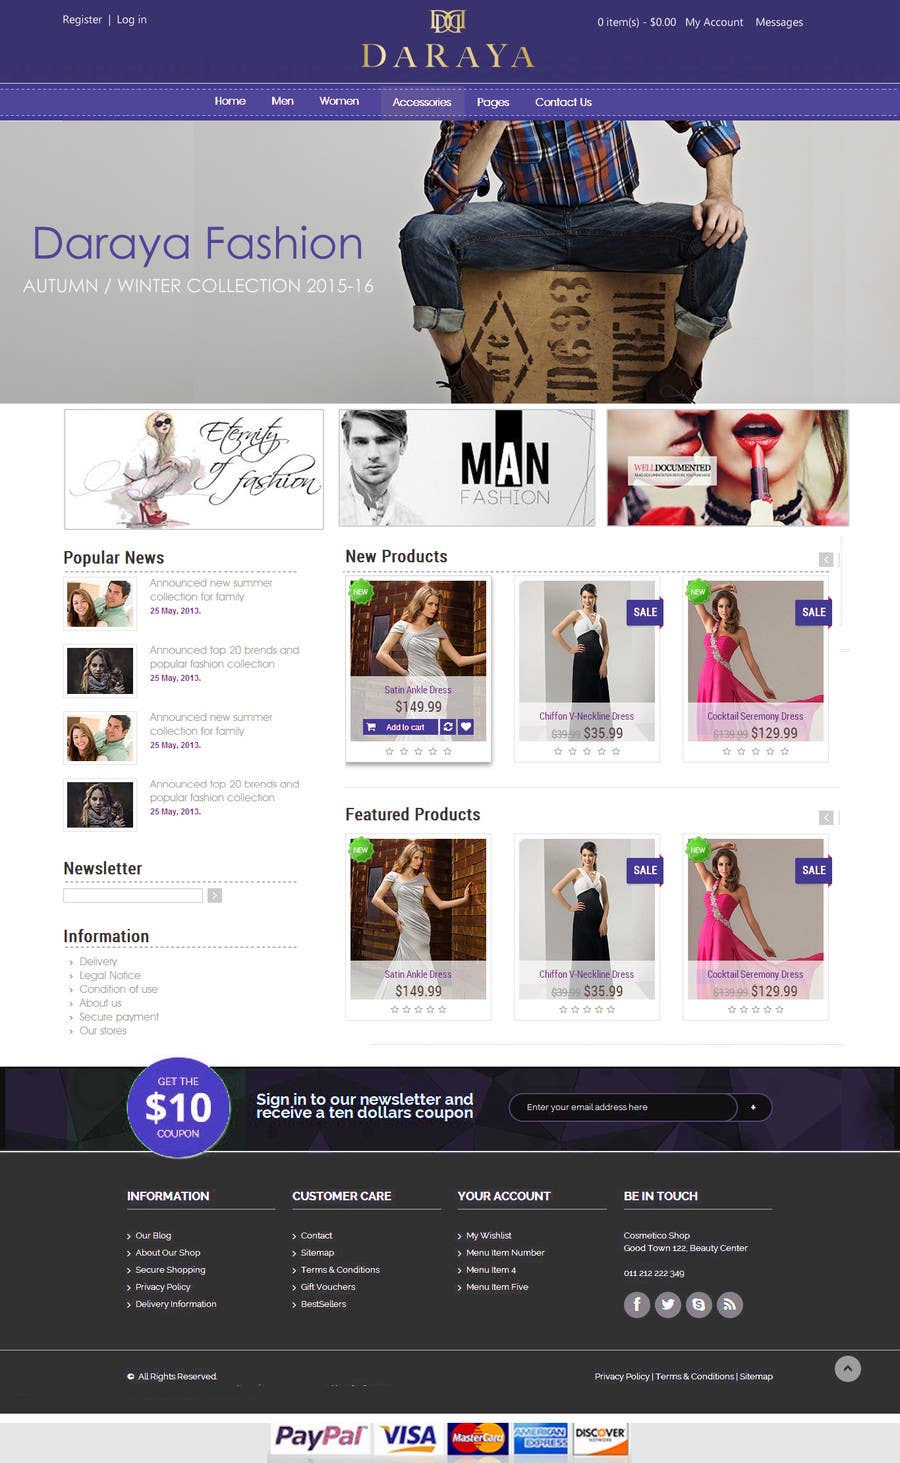 Proposition n°13 du concours                                                 LUXURY FASHION BRAND - Build a Website and Online Store
                                            